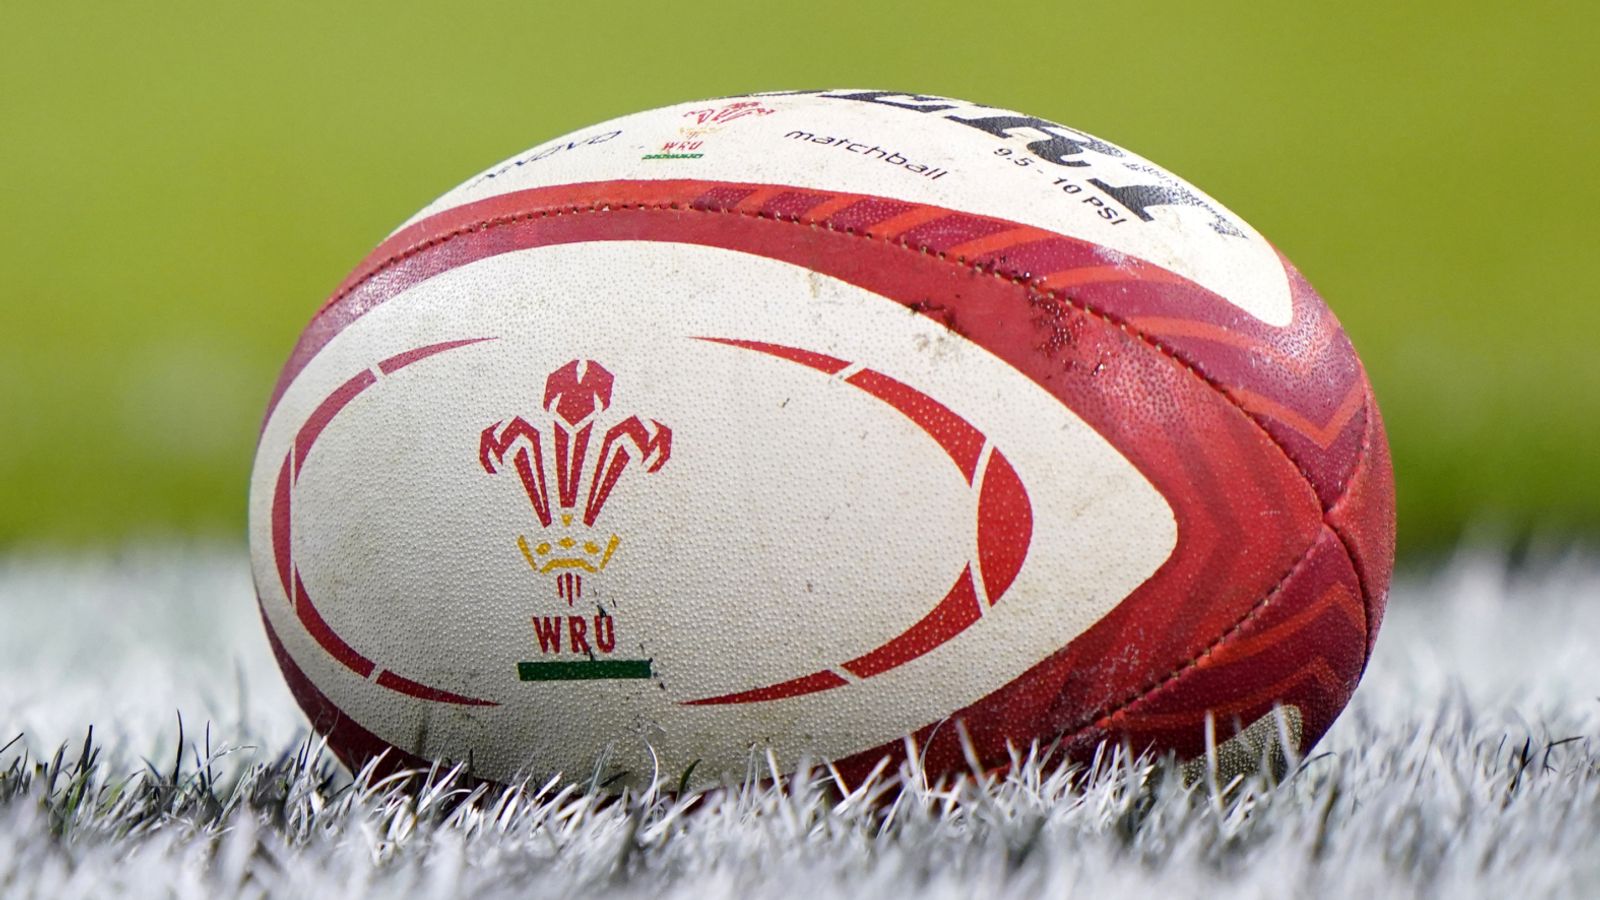 WRU 'shocked and appalled': We will review procedures | Welsh Government urges 'immediate actions' | Rugby Union News